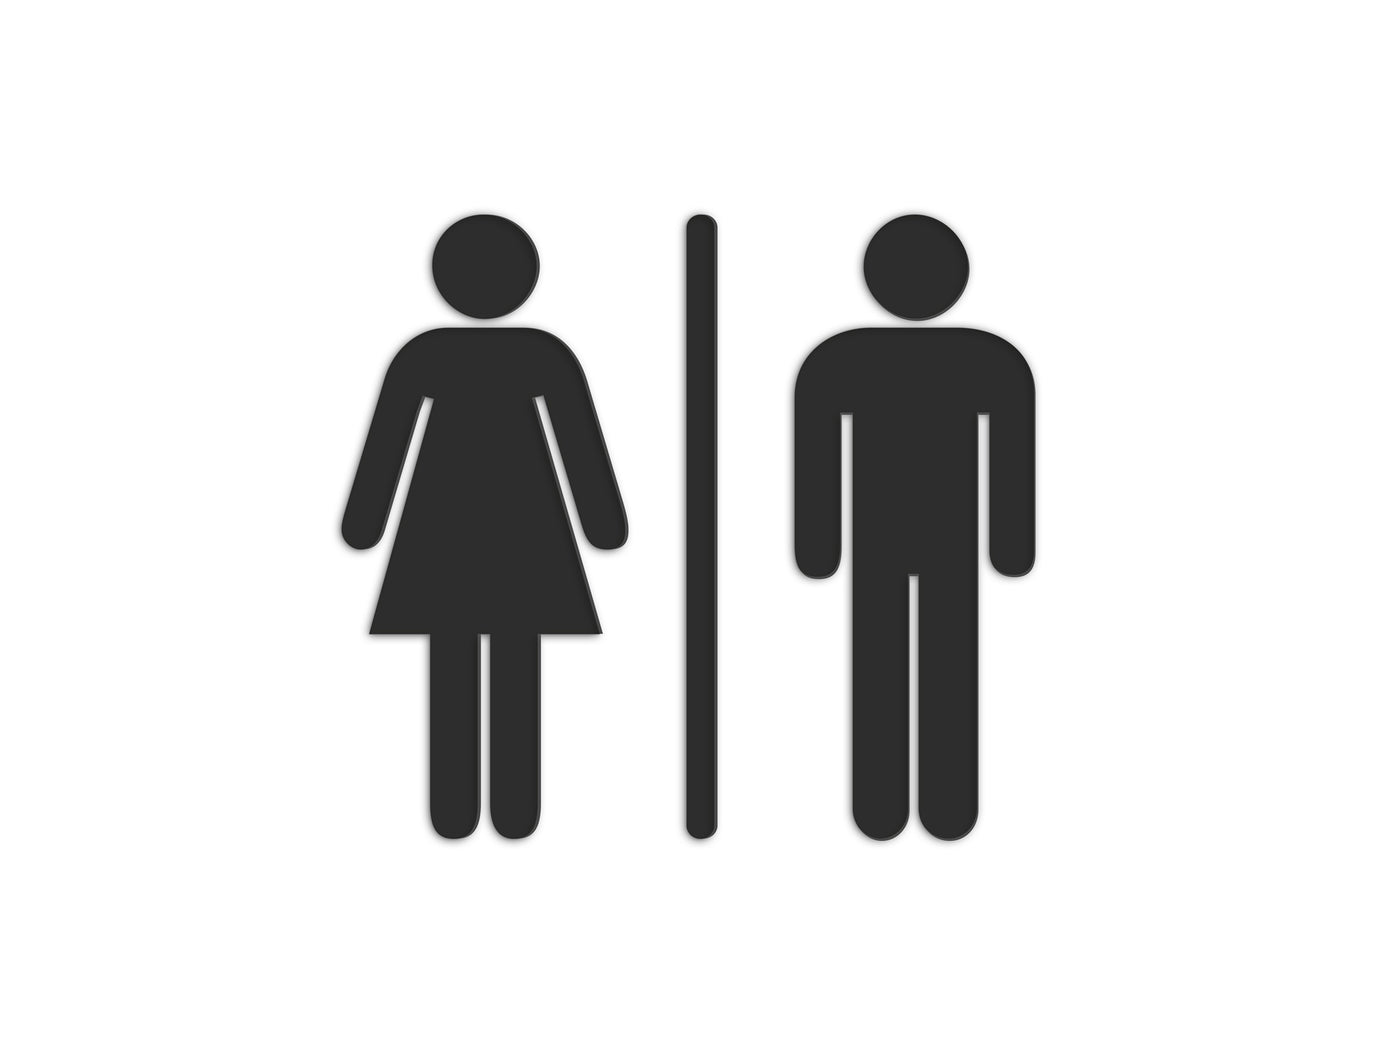 Classic, Set 2x - Embossed Adhesive Symbols, Signage for Toilets -  Man, Woman restroom